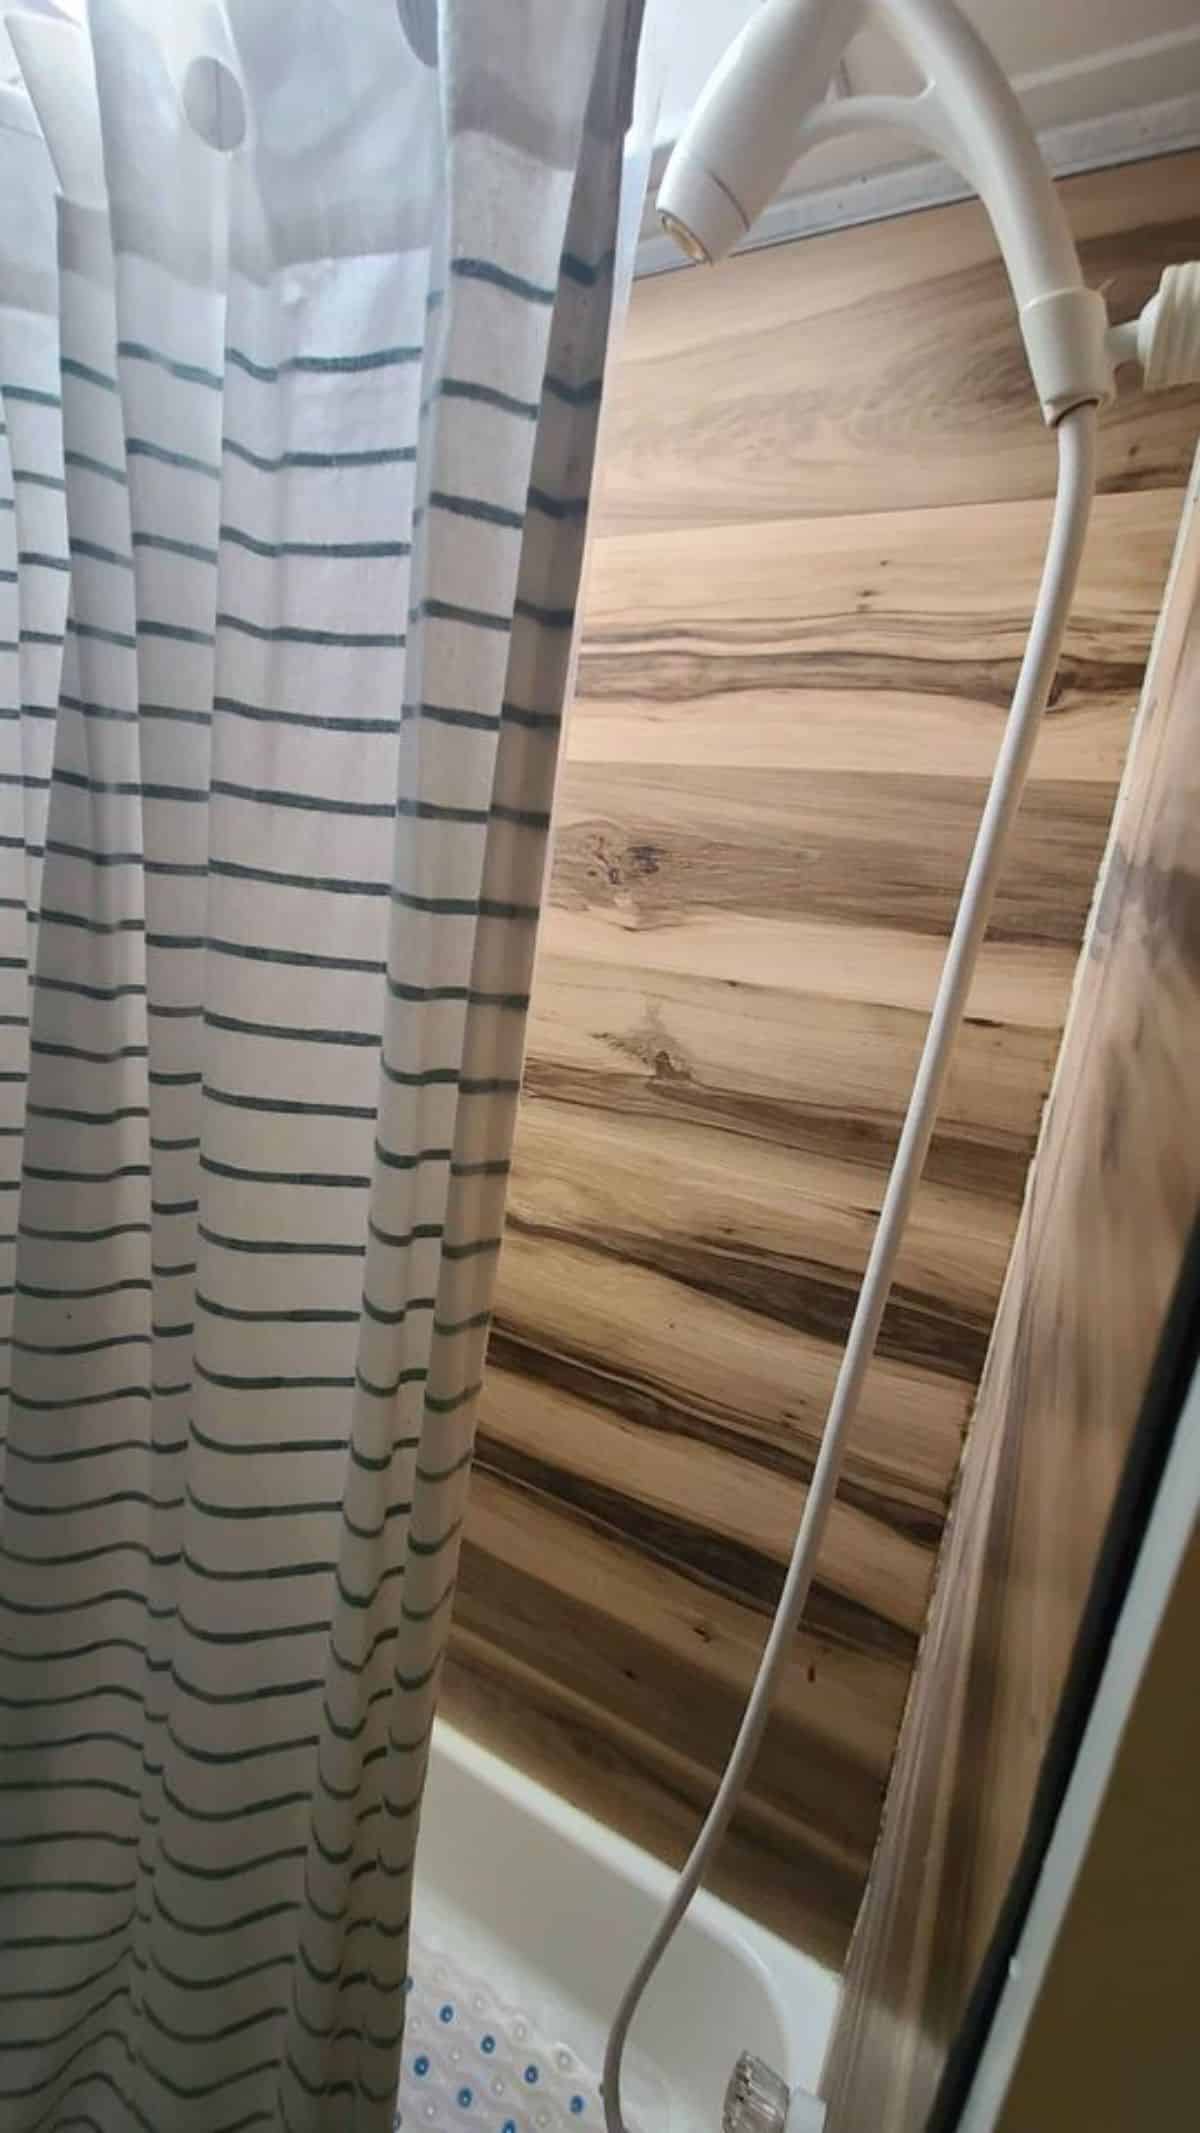 Shower area in bathroom of remodeled tiny home